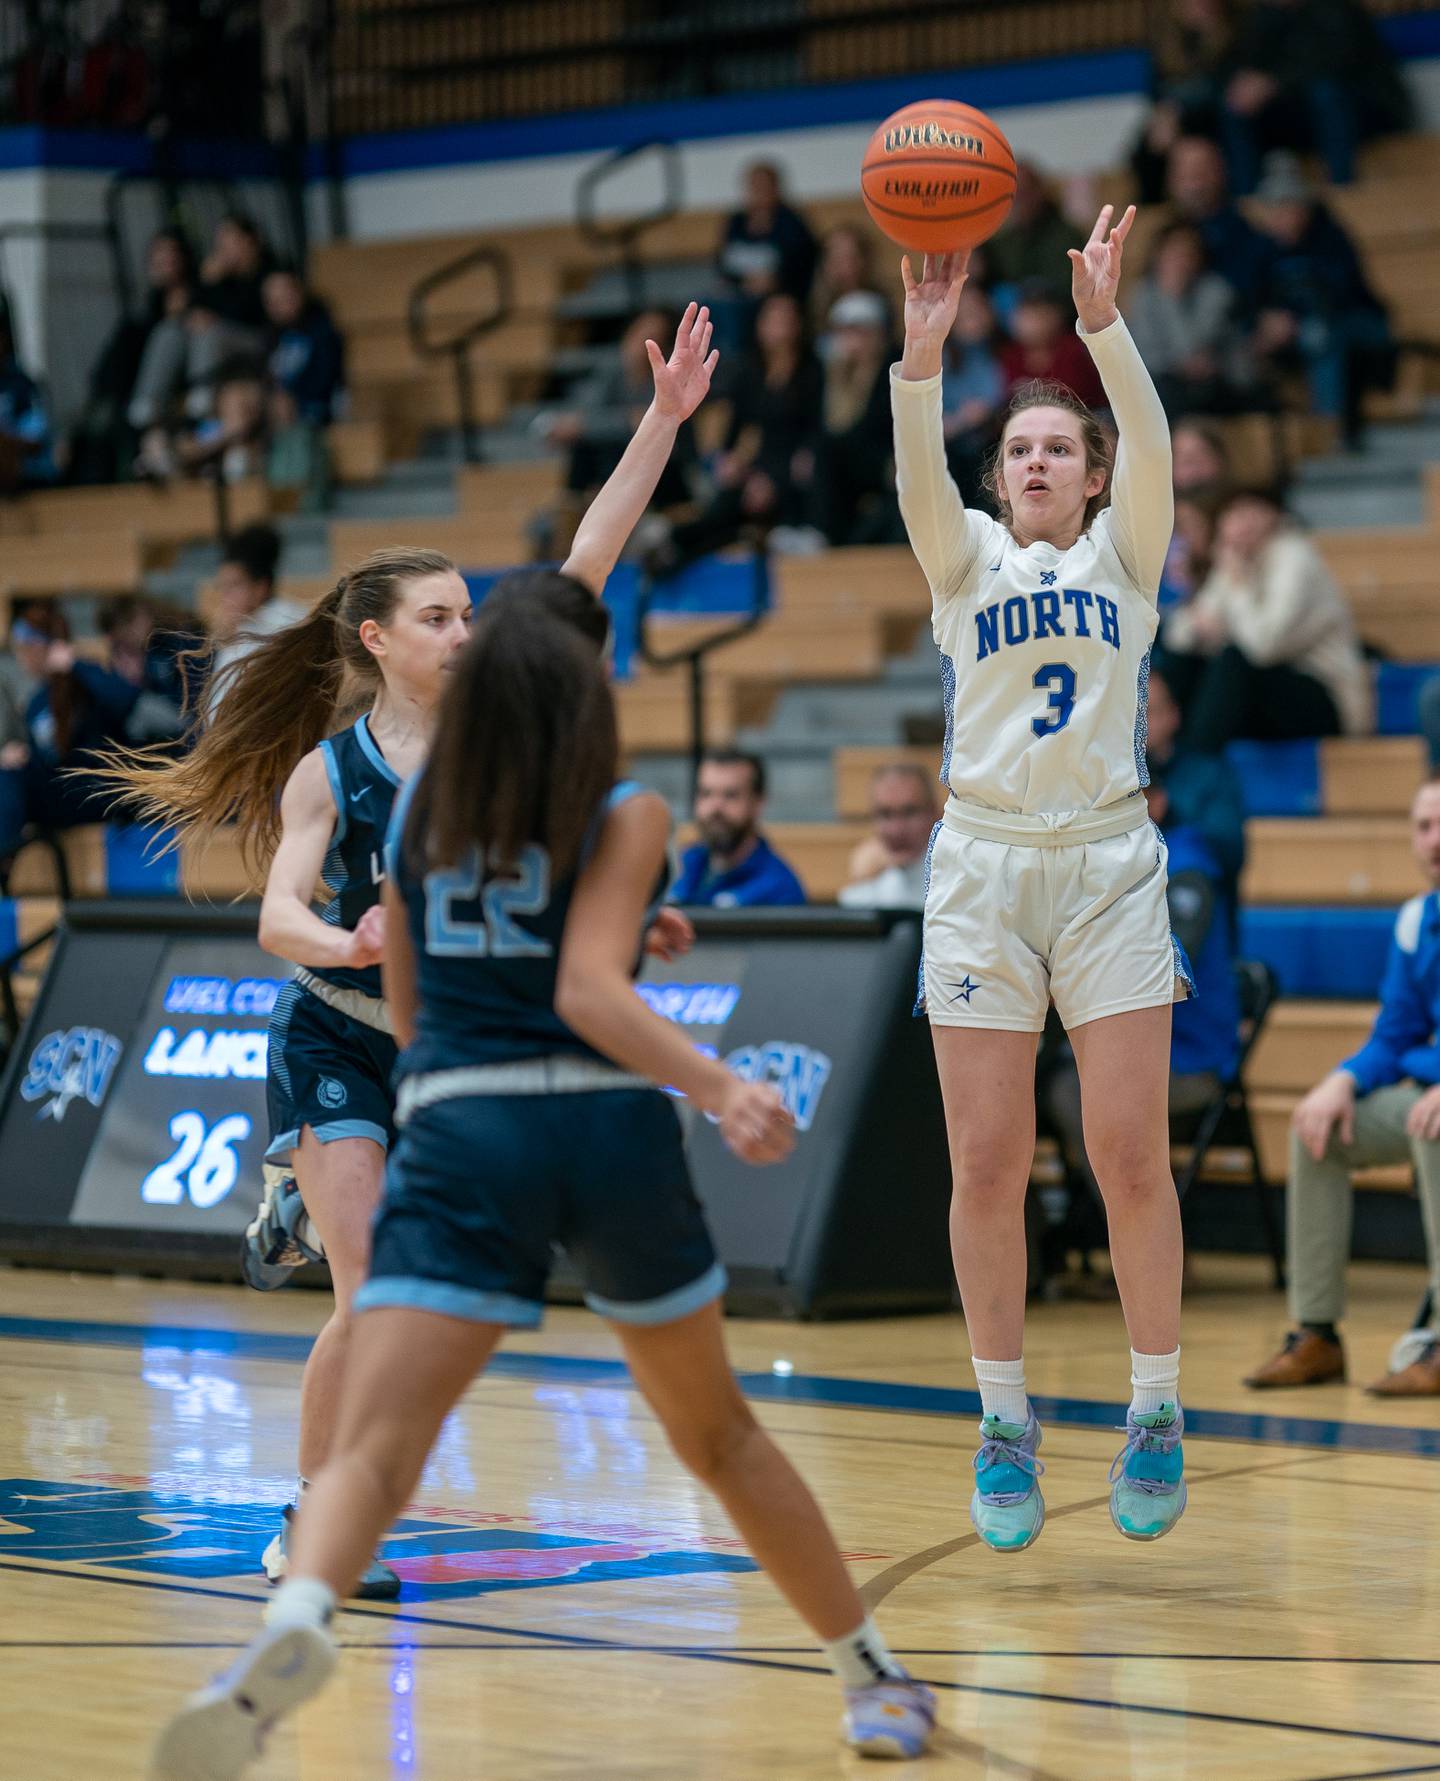 St.Charles North's Alyssa Hughes (3) shoots a three-pointer against Lake Park during a basketball game at St.Charles East High School on Wednesday, Dec 21, 2022.